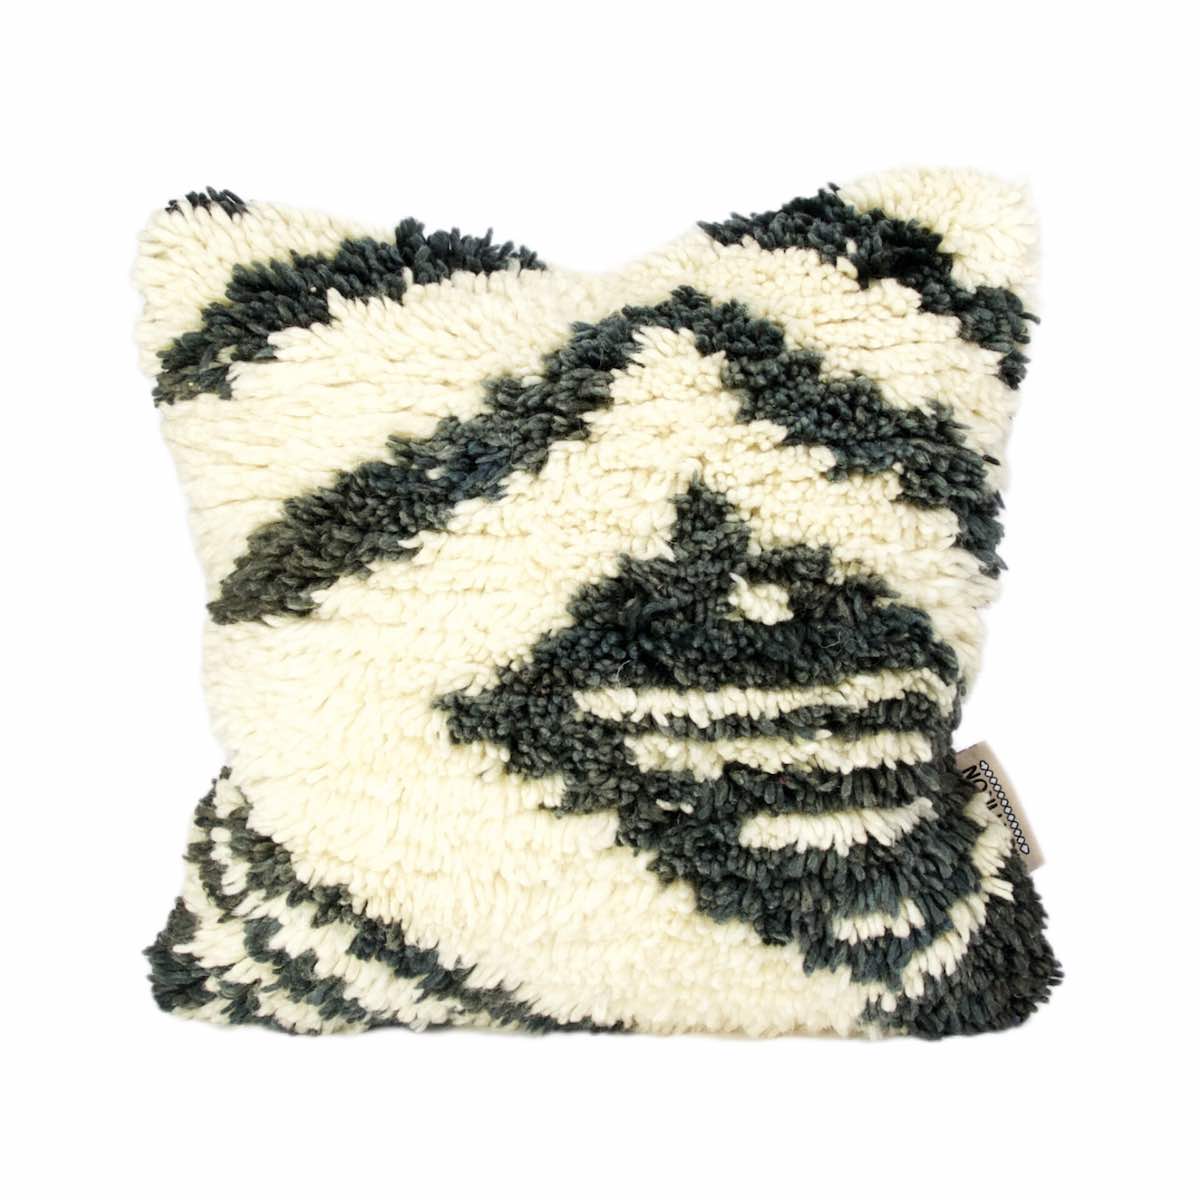 Fluffikon rug pillow made from black and white Moroccan wool rug. Its is presented as a unique Christmas gift idea.